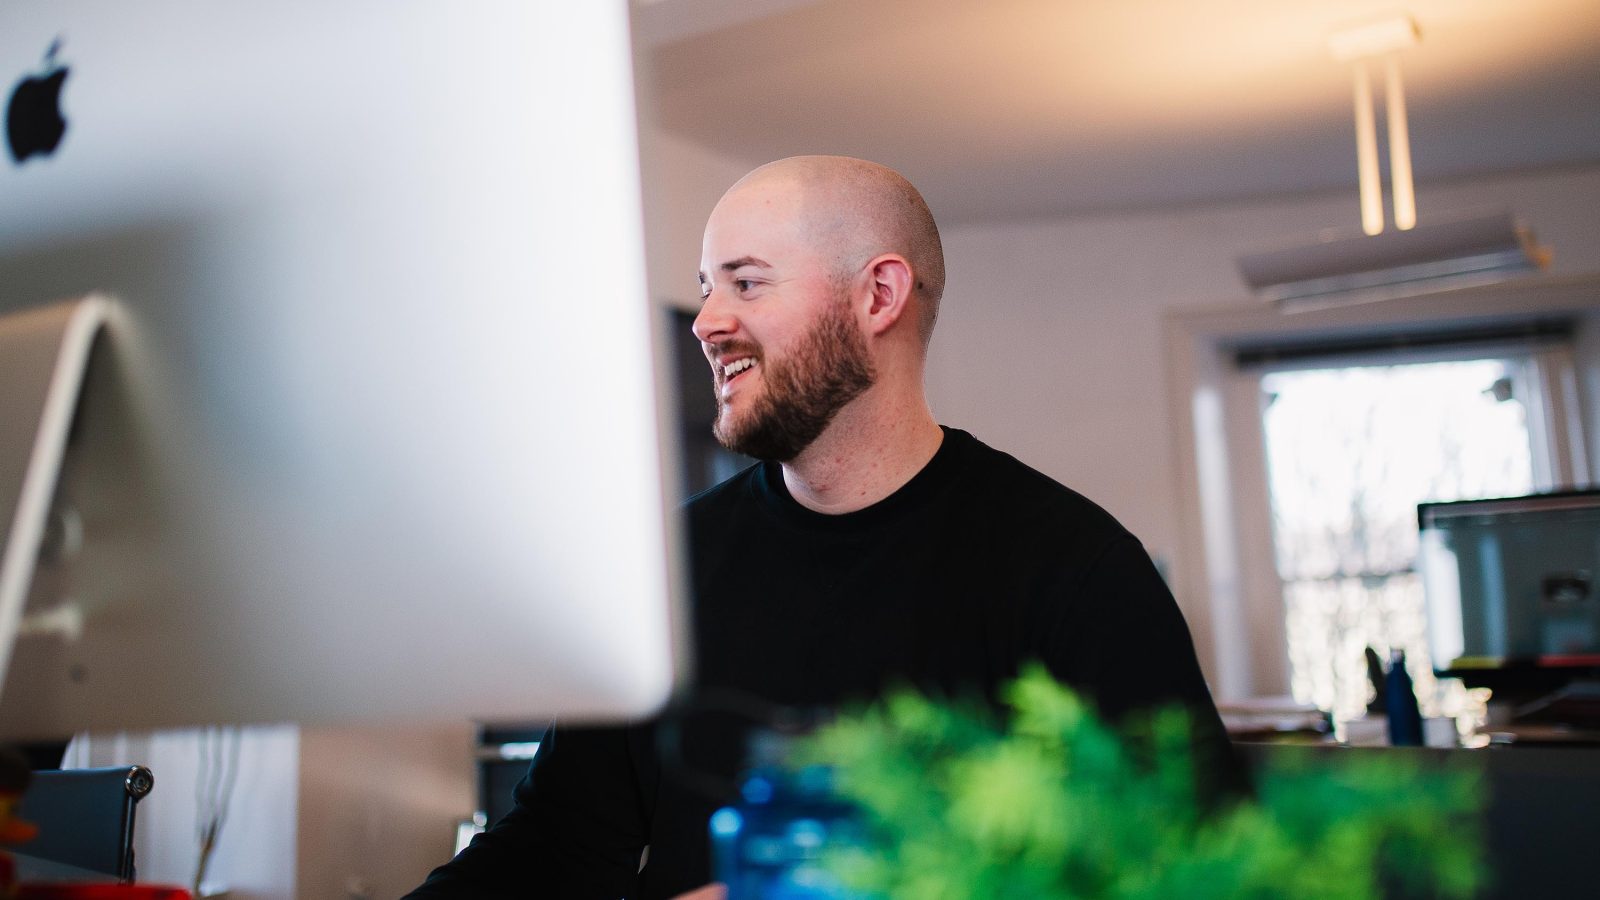 A bald man in a black shirt smiles while working on website design at a desk with an iMac and other office items in a well-lit room.